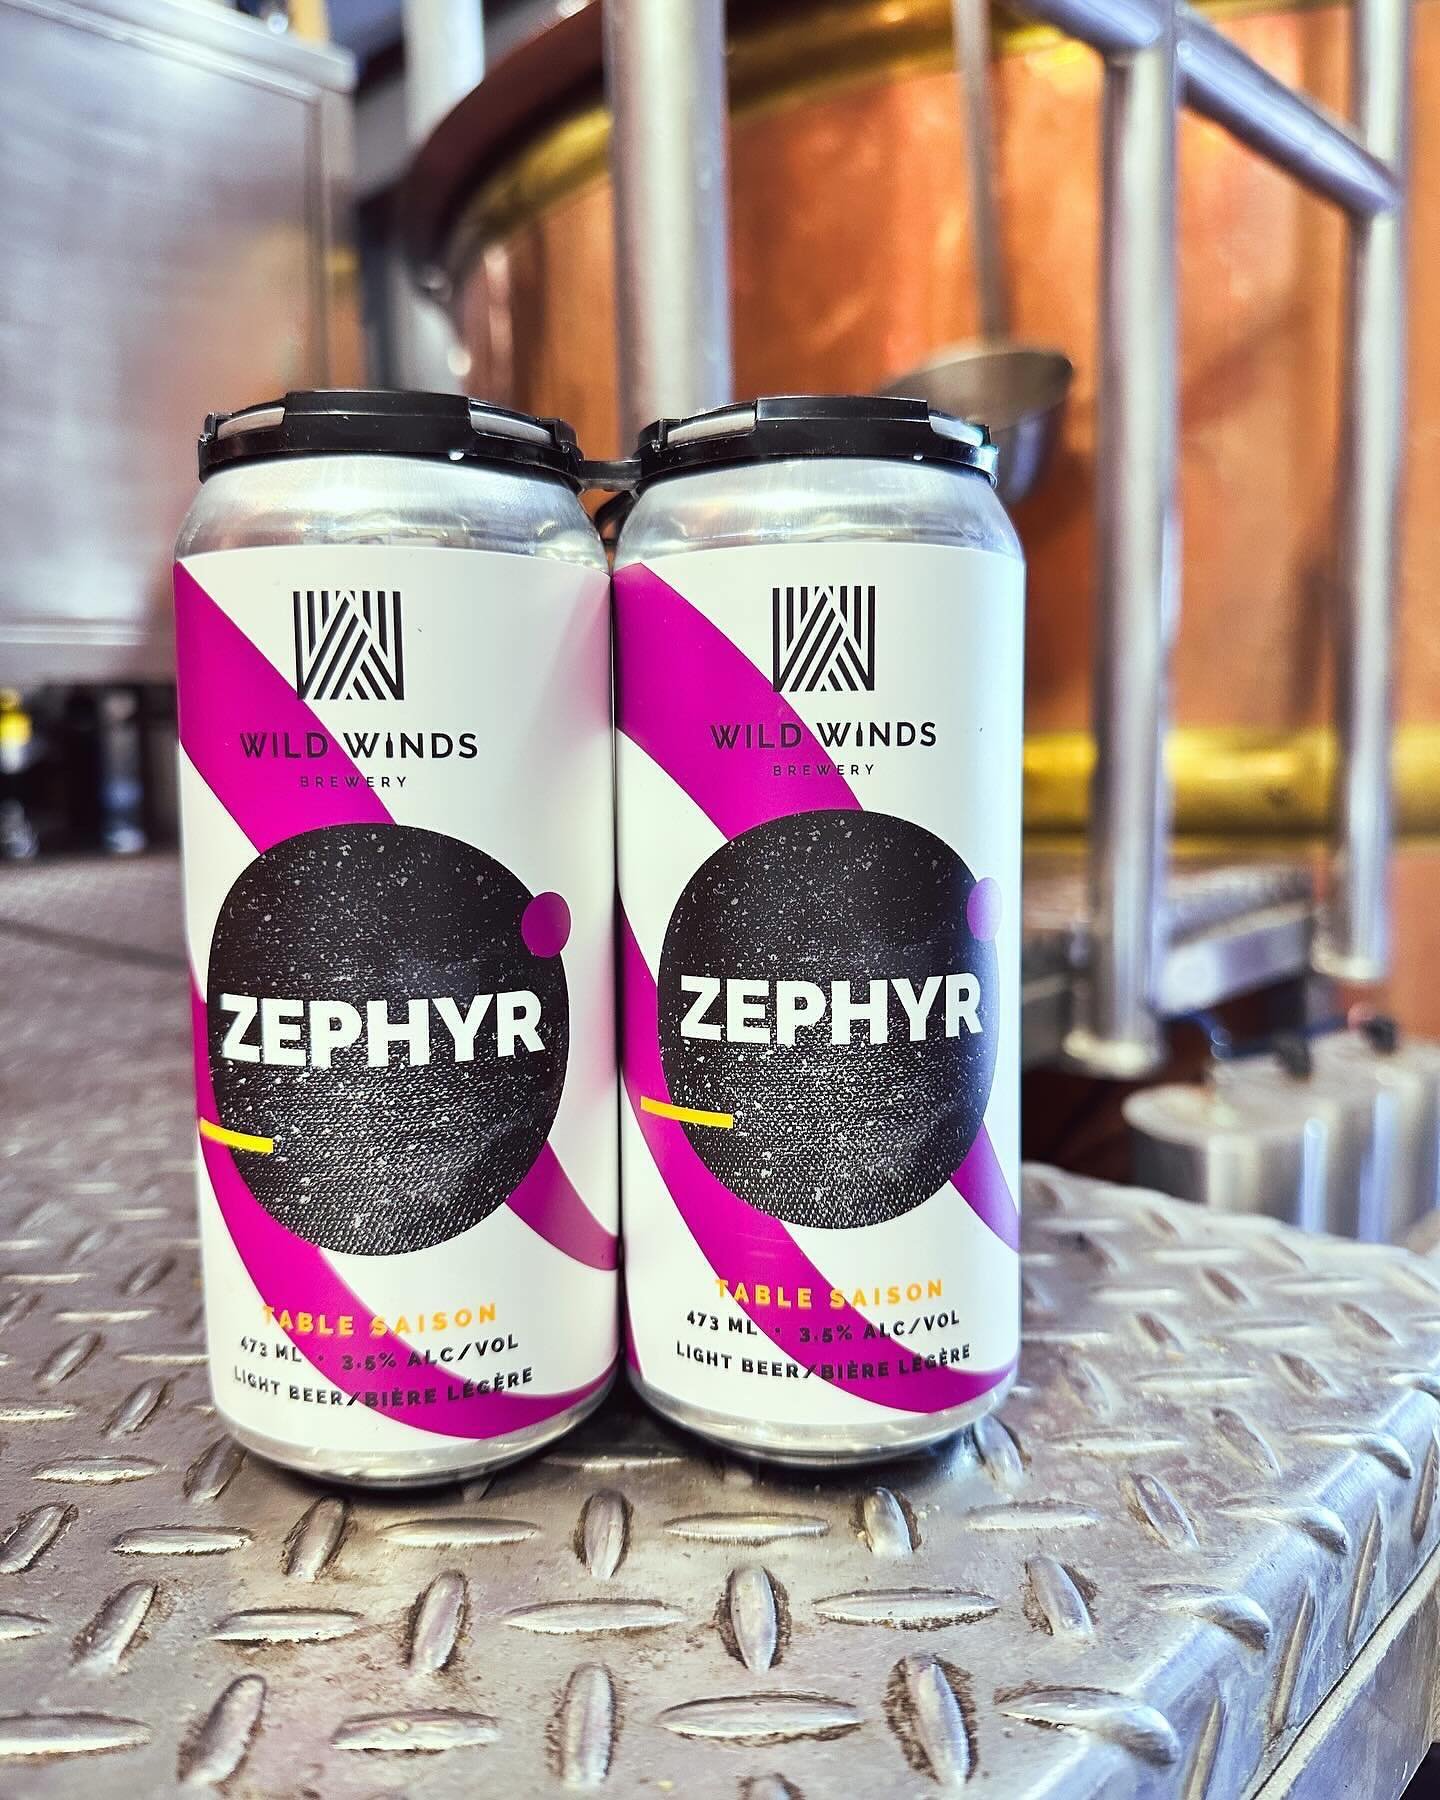 Exciting news, friends! Our Zephyr - Table Saison (SKU: 888114) has been packaged and is set to embark on its journey to Liquor Connect next week! 

What I love about this beer is the Belgian yeast character - lemon, pear and orange zest with a promi